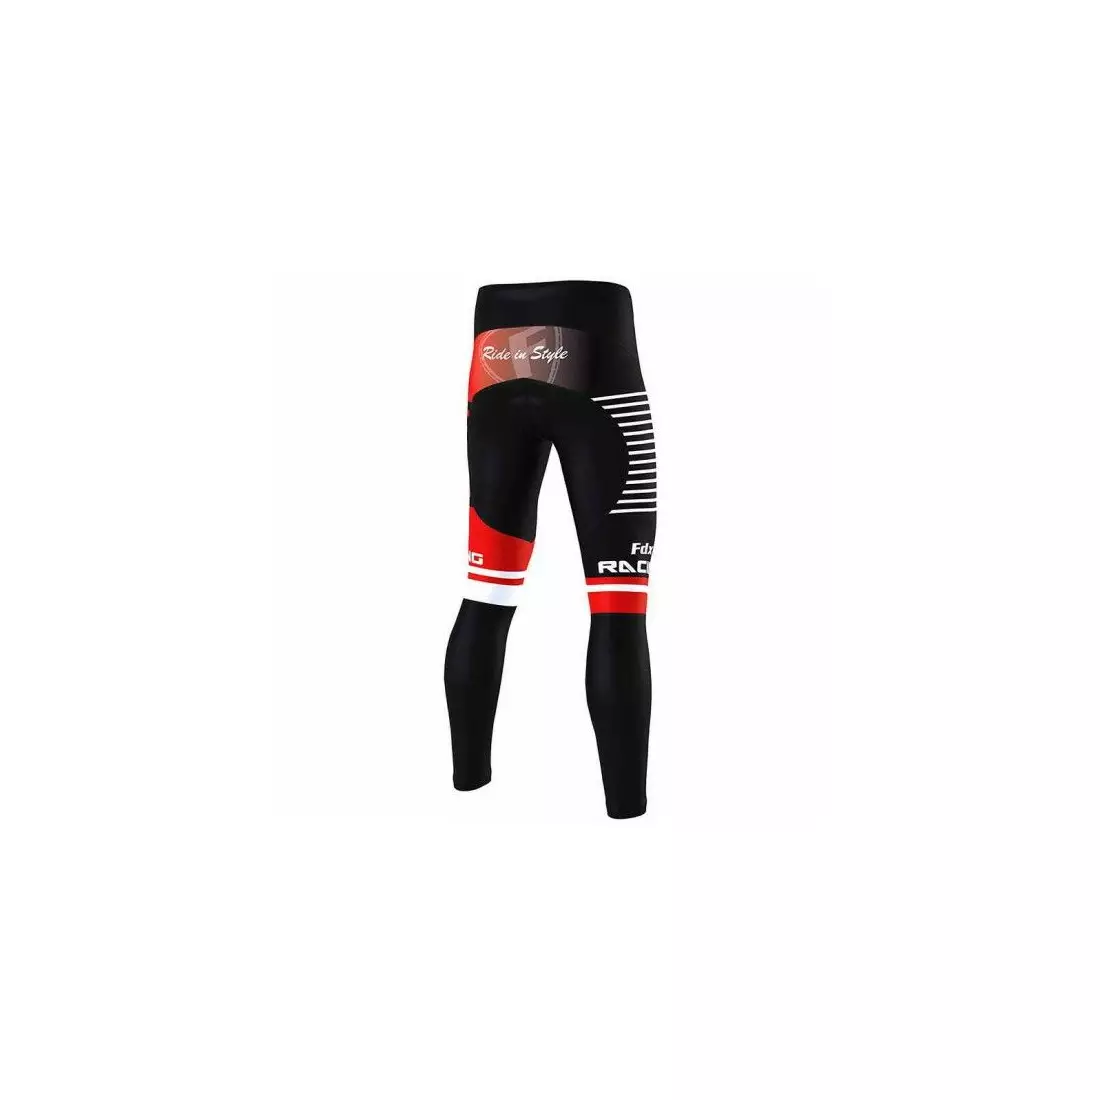 FDX 1800 insulated cycling pants for a bicycle, black-red